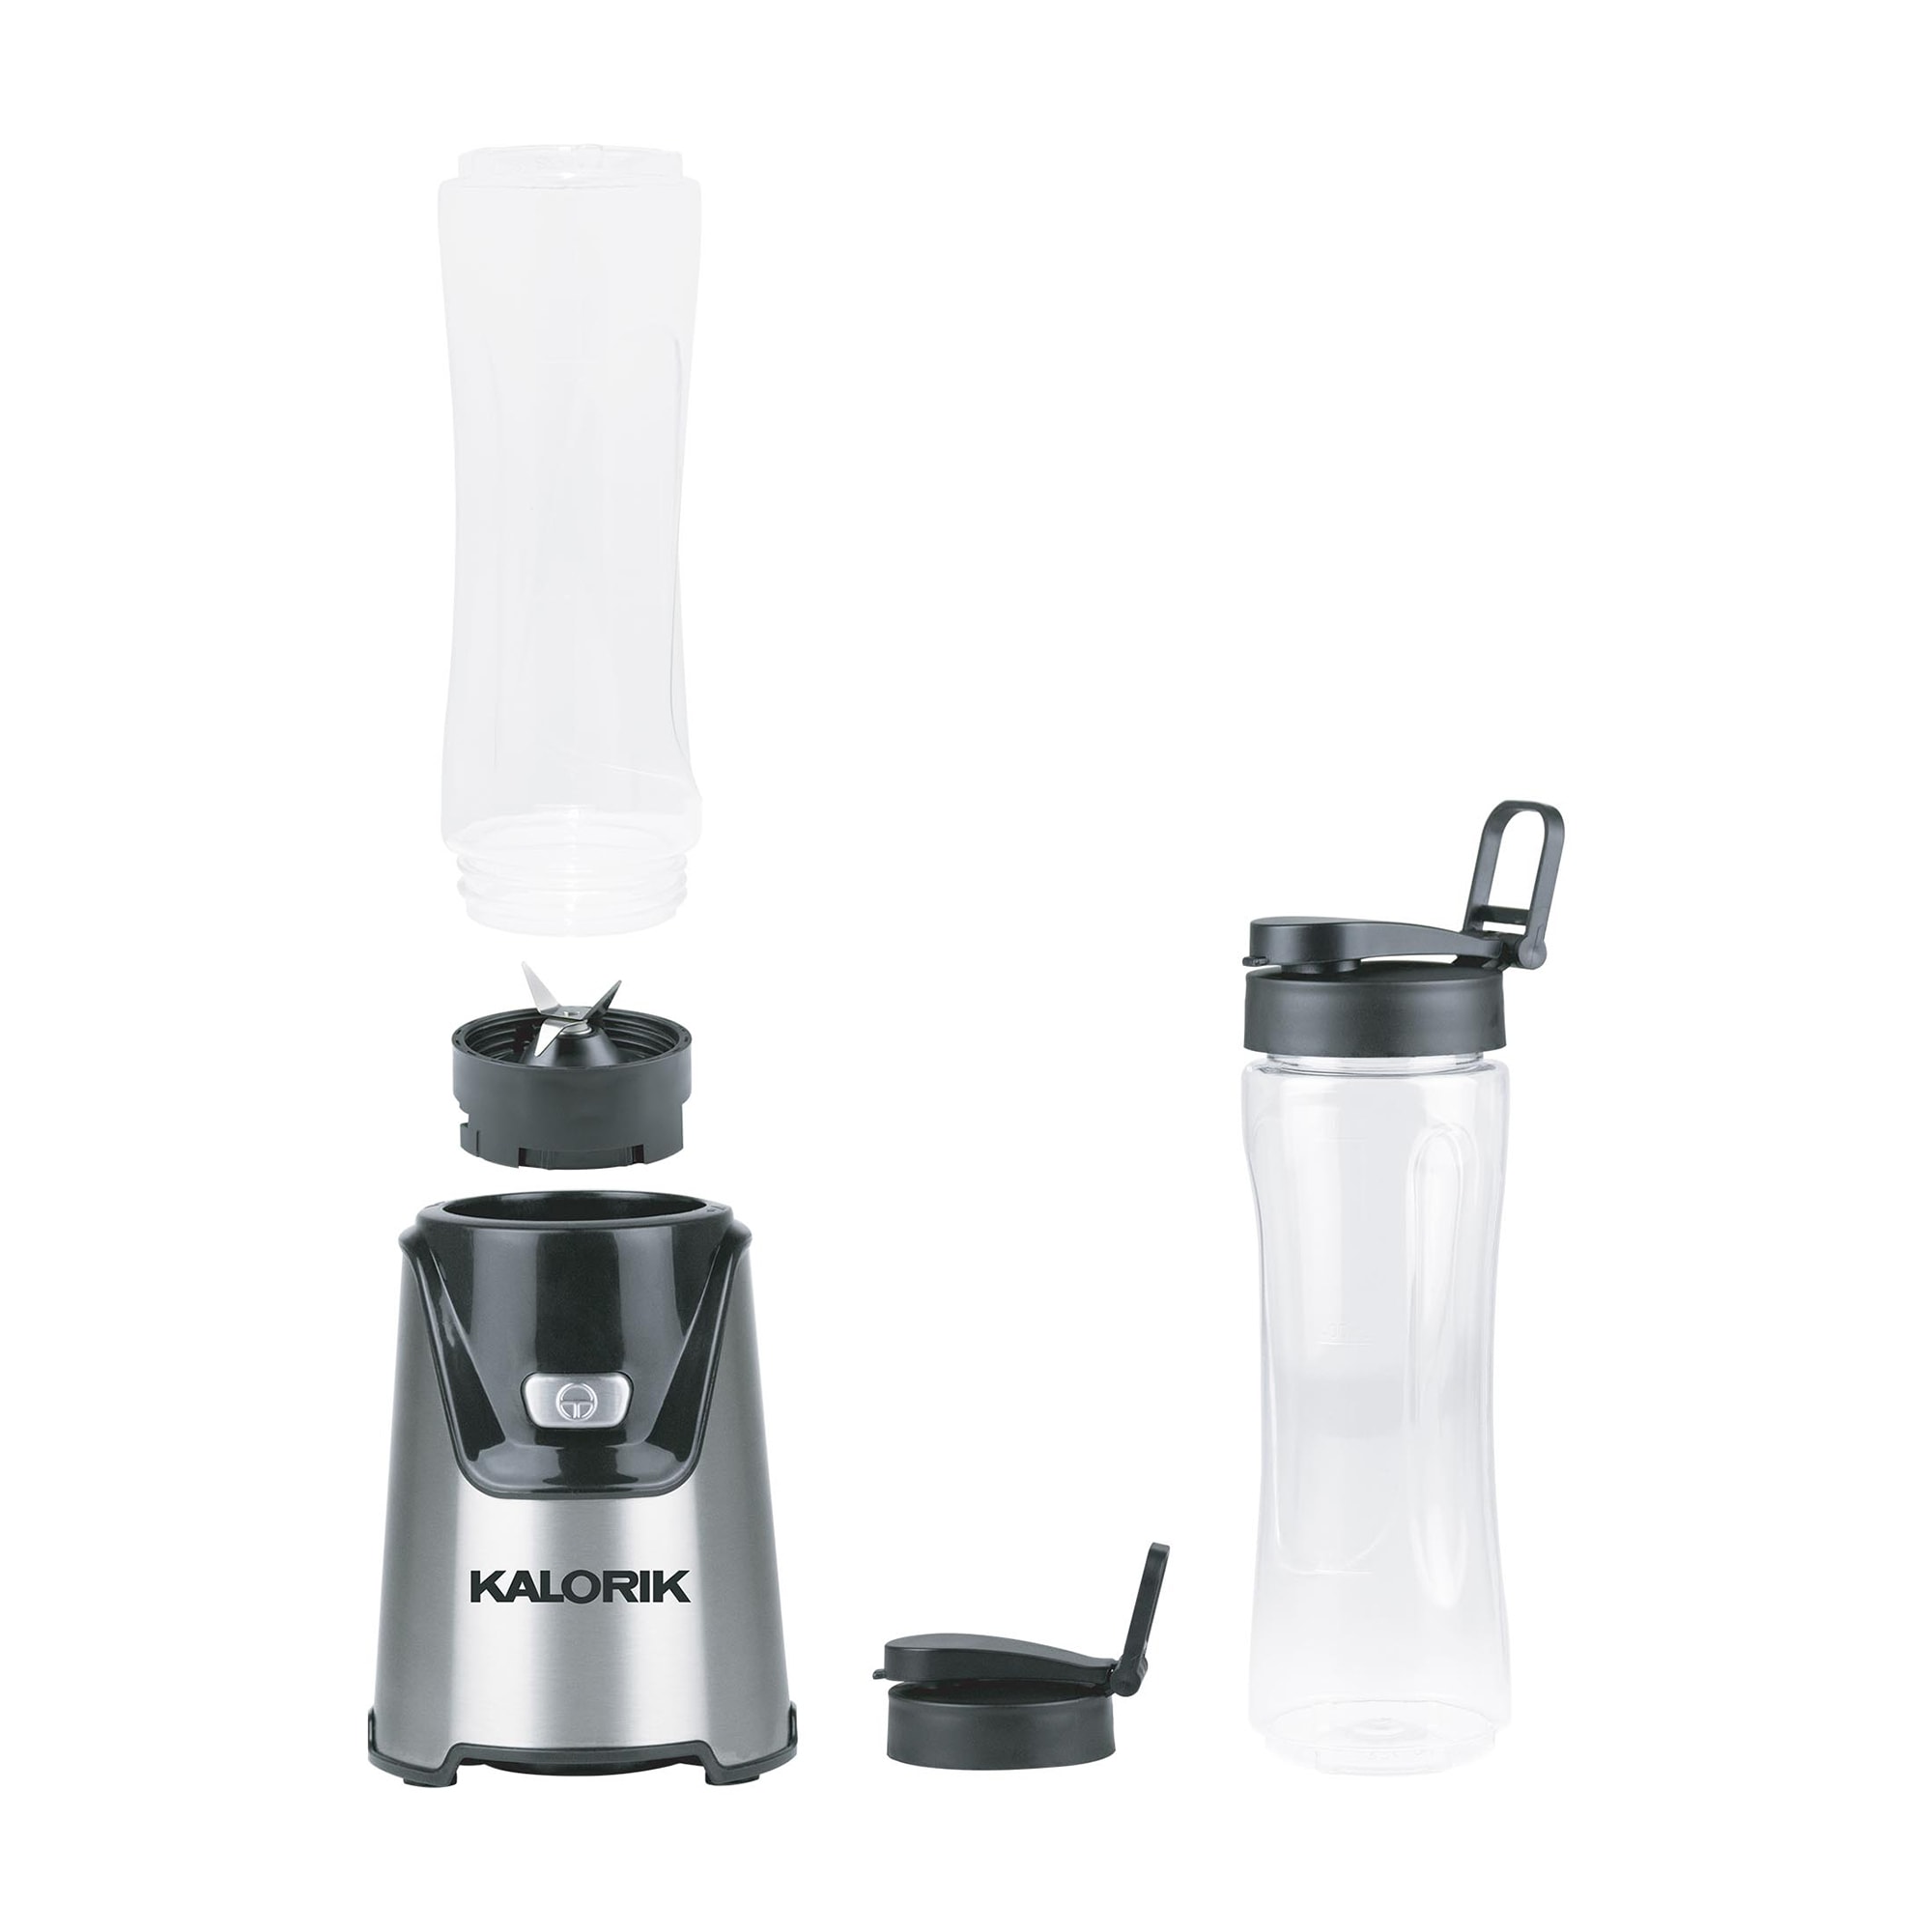 Electric Shaker Bottle, 34 oz Blender Bottles, Made with Tritan - BPA Free  - Portable Mixer Cup/USB Rechargeable